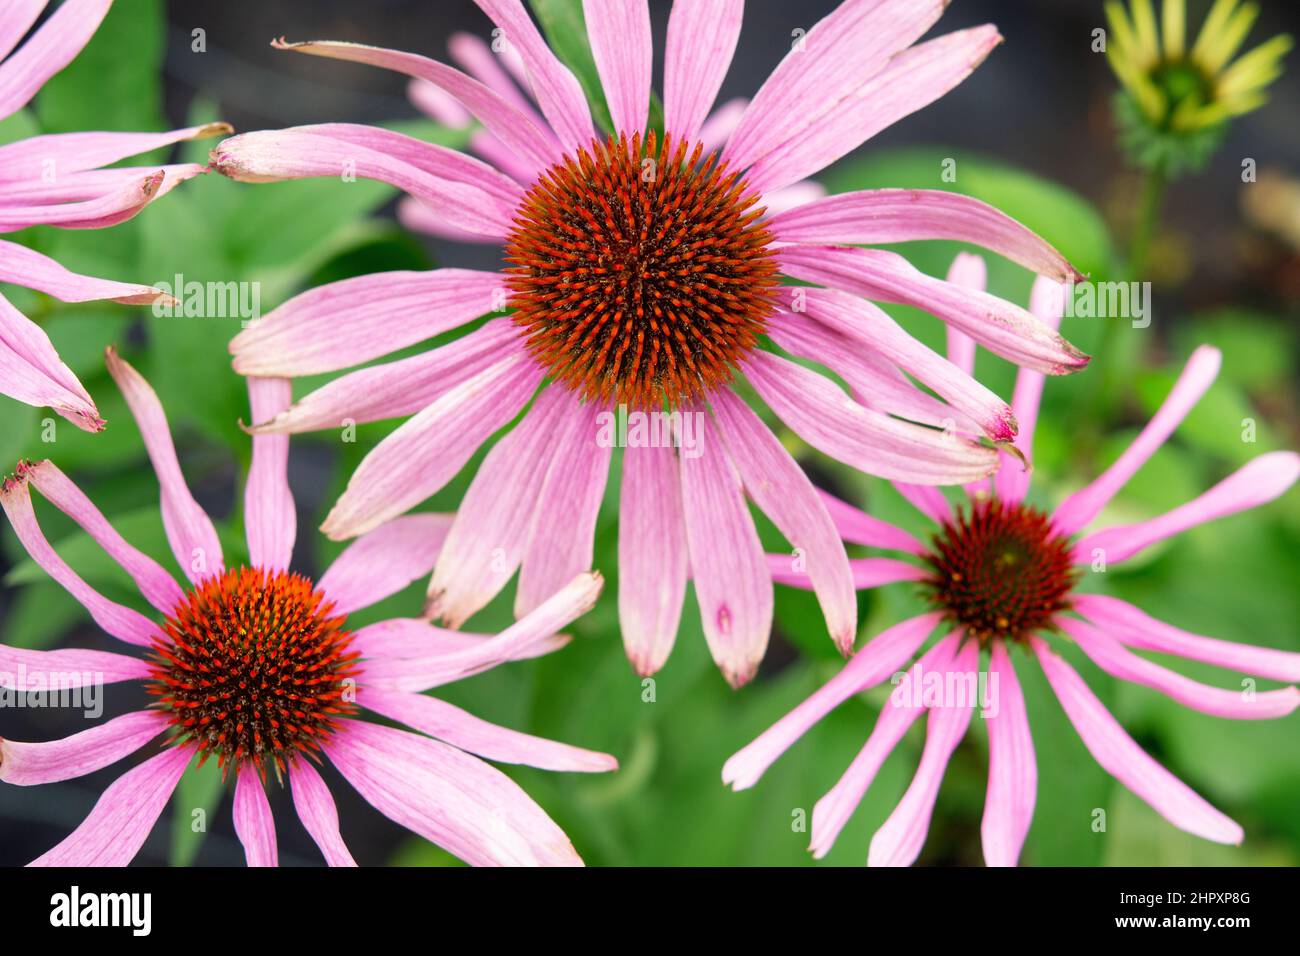 Echinacea purpurea, close up of flowering heads. Echinacea is used in traditional herbal medicine, common know as eastern purple coneflower. Stock Photo